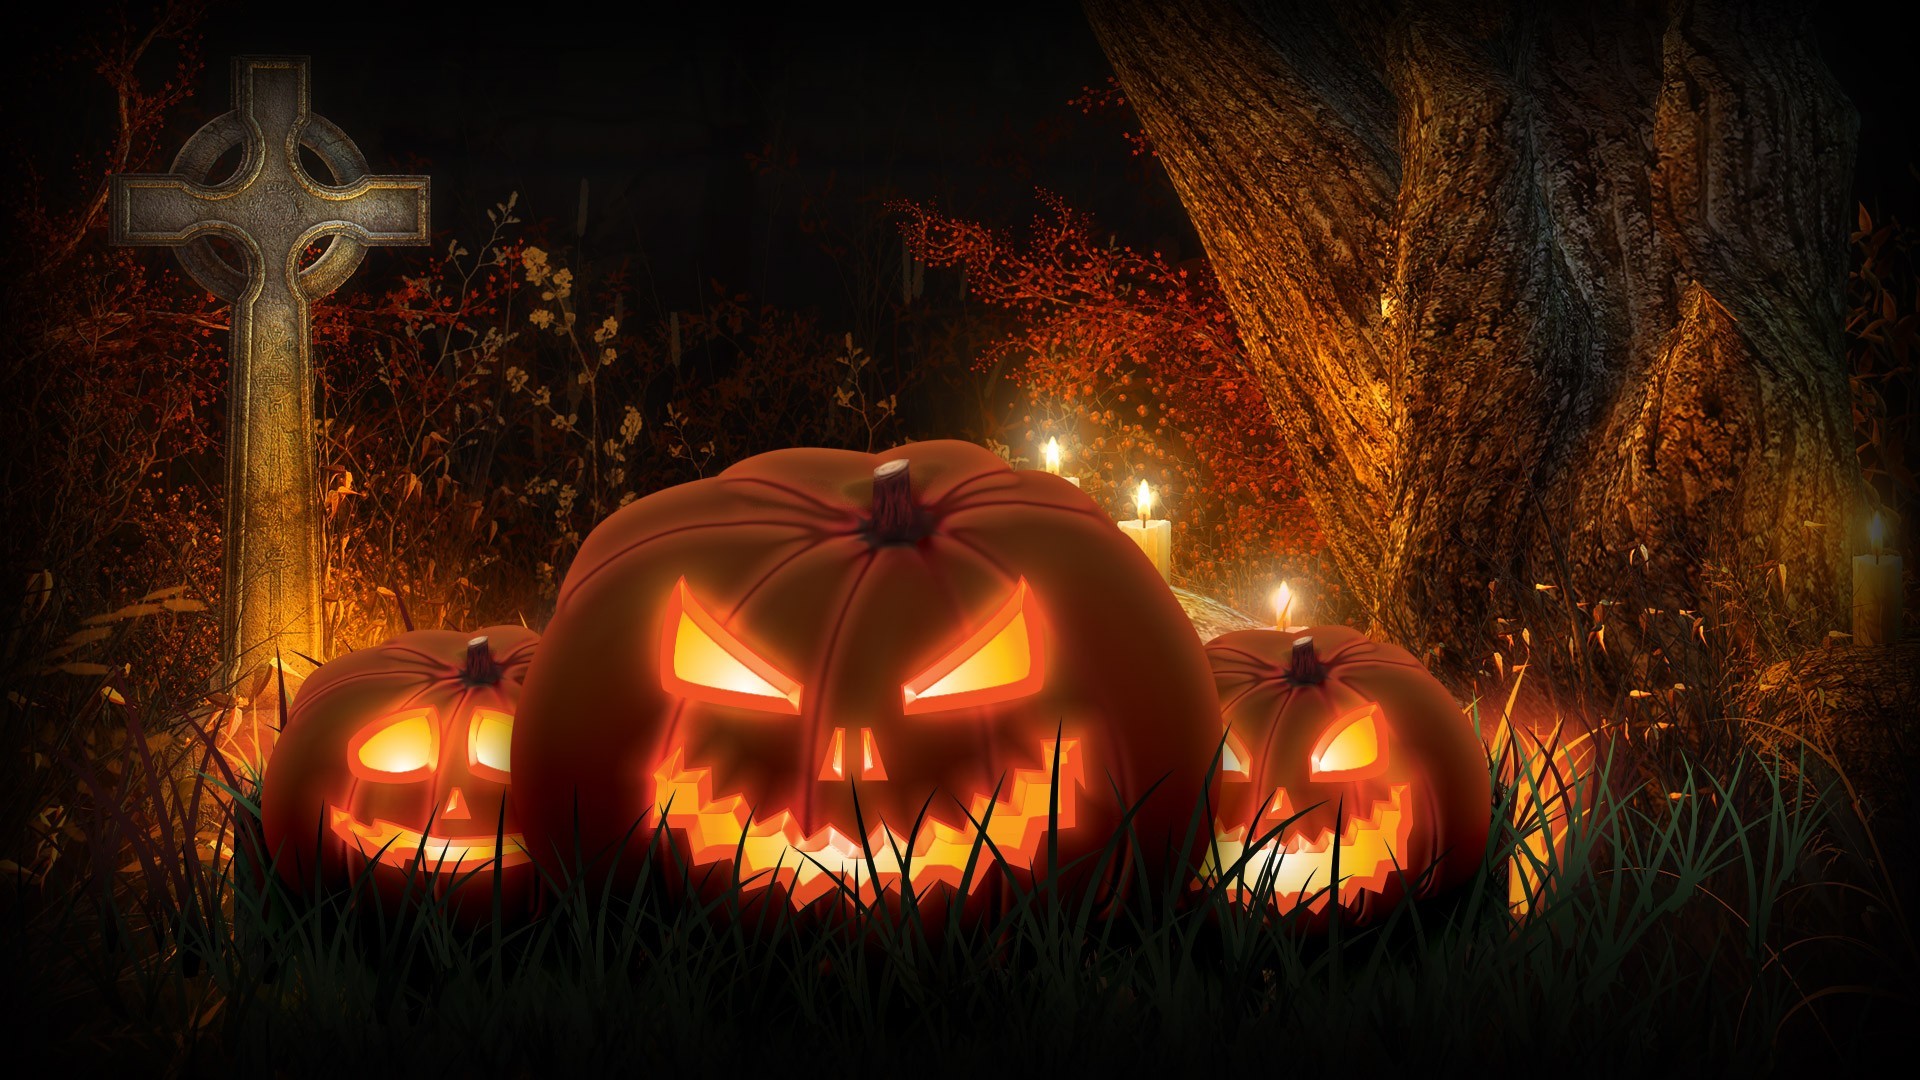 1920x1080 halloween scary jacck skellington spooky cemetery pumpkins cool images  download amazing tablet colourful desktop wallpapers samsung phone  wallpapers 1080p ...